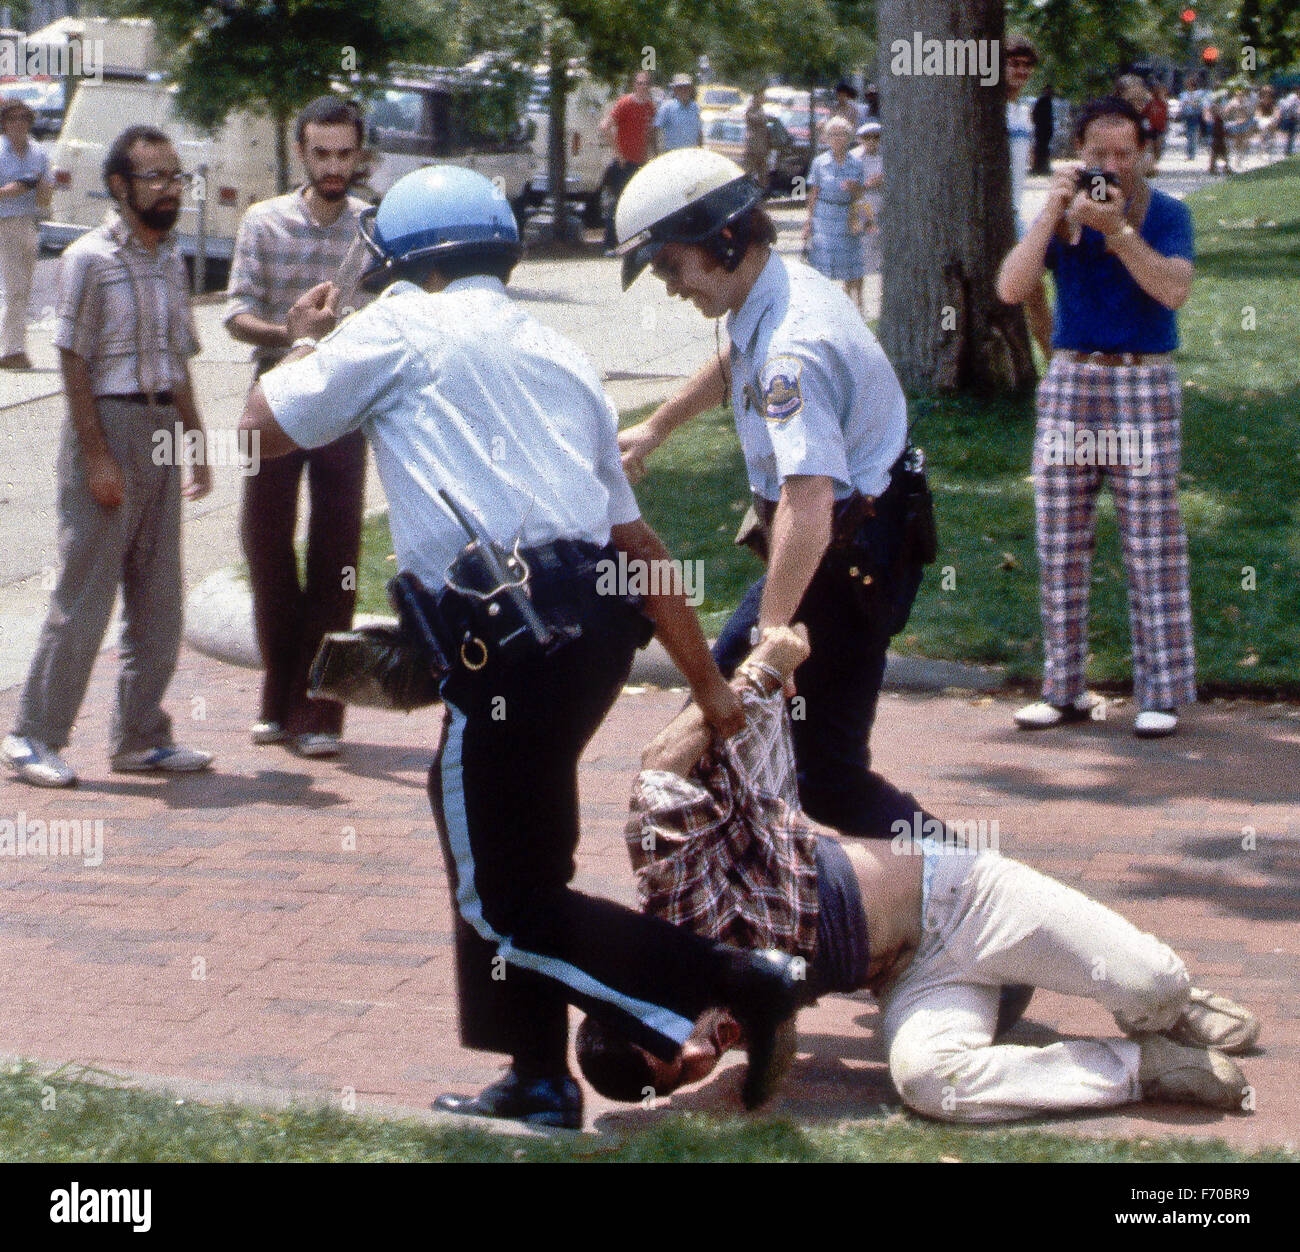 Washington DC. USA 27th July 1980 D.C. and US Park Police clash with supporters of the Ayatollah Khomeini and the Iranian Islamic Revolution. Credit: Mark Reinstein Stock Photo